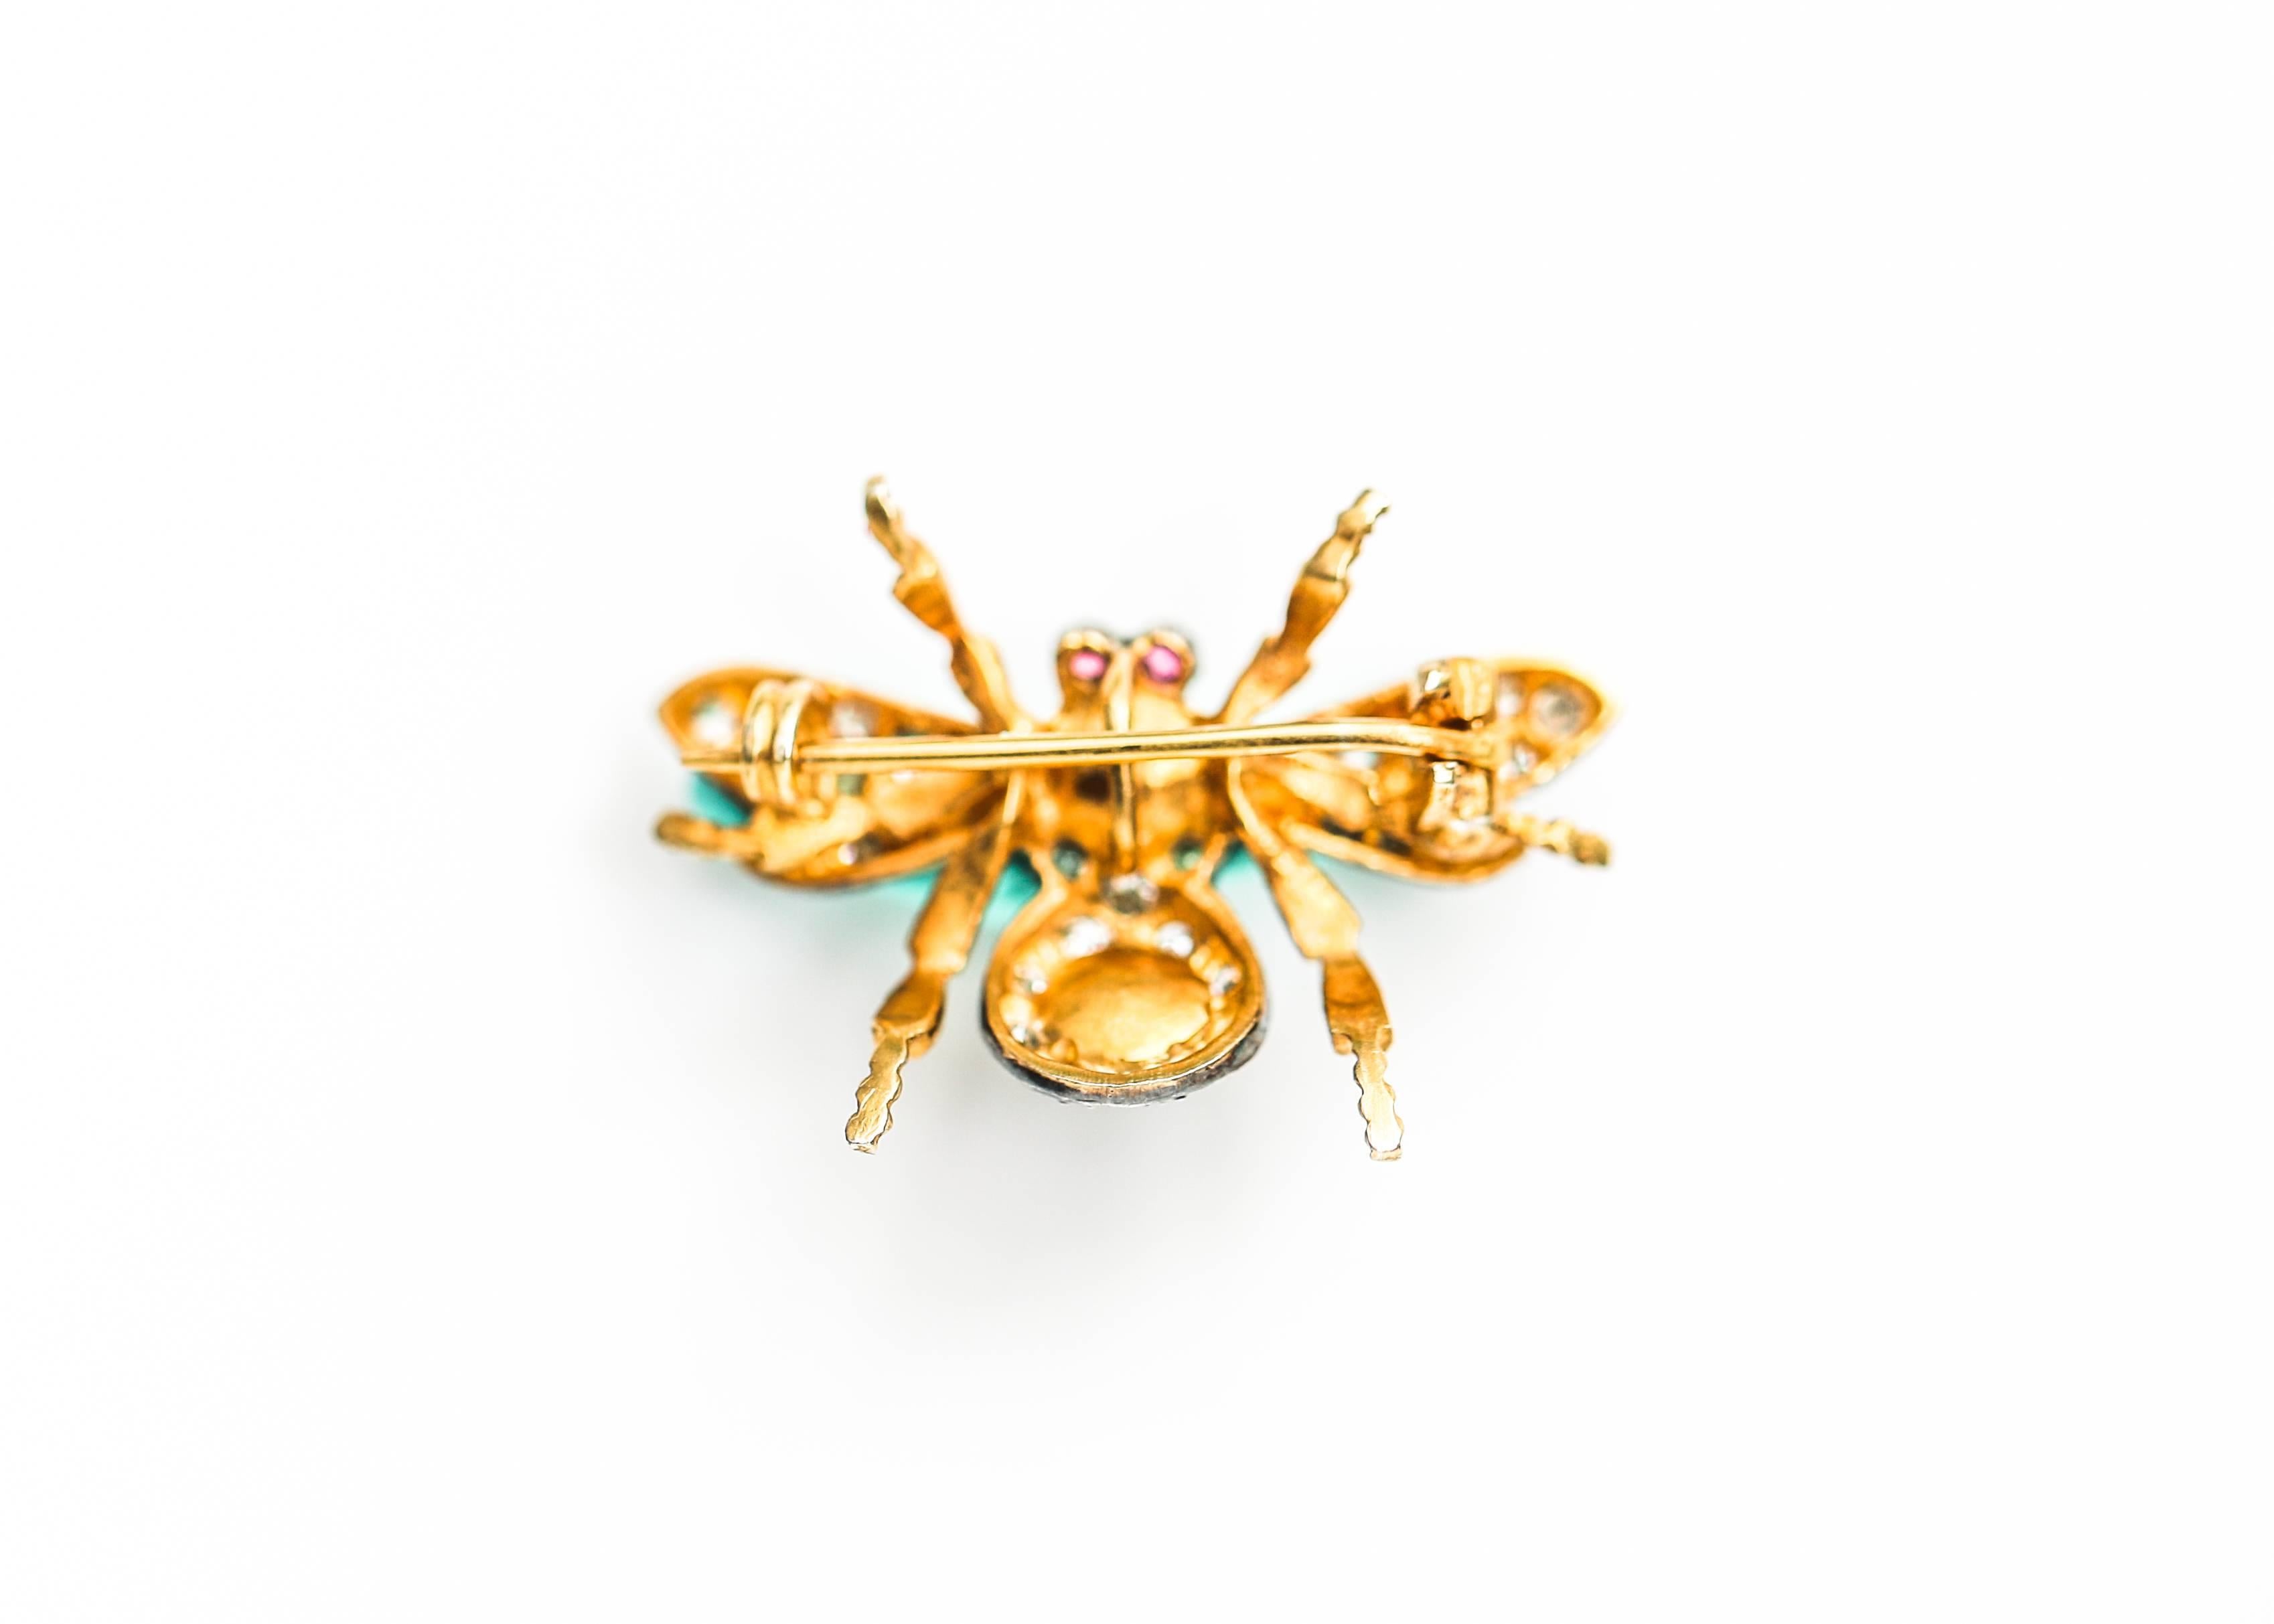 1950 Retro Diamond, Opal, Ruby Insect Convertible Pin with 18 Karat Yellow Gold and Sterling Silver

This Darling, diminutive Pin features 2 round Opal cabochons, 2 round Rubies and .20 carats of Diamonds. Diamonds cover the 4 wings and embellish